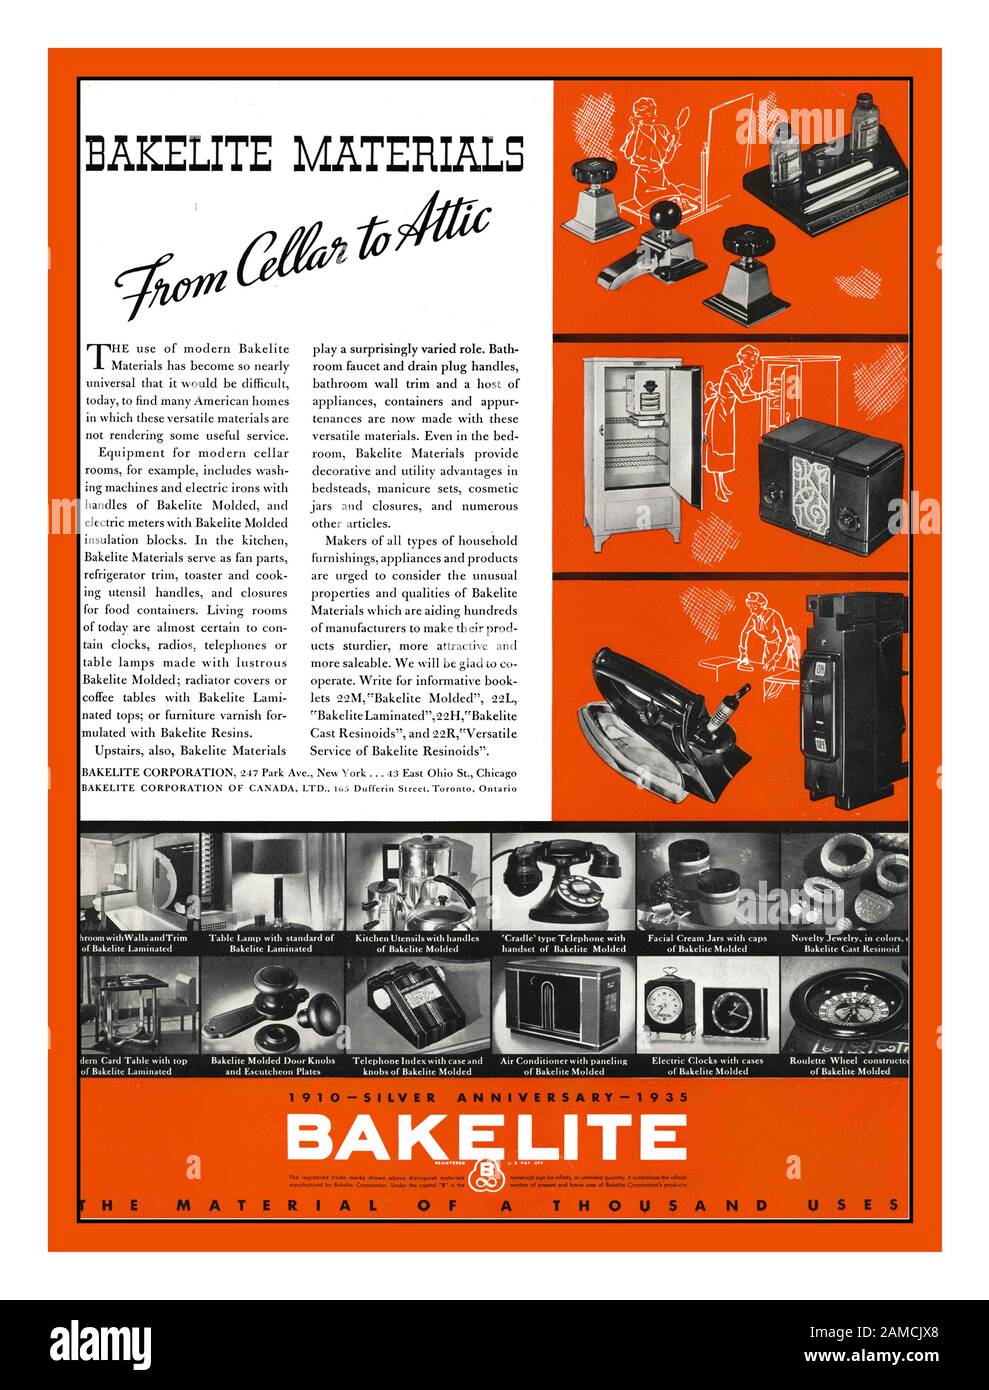 1930’s Bakelite press advertisement 'From Cellar to Attic'  ‘The material of a thousand uses’ 1910-1935 anniversary America USA It was developed by the Belgian-American chemist Leo Baekeland in Yonkers, New York, in 1907. Stock Photo